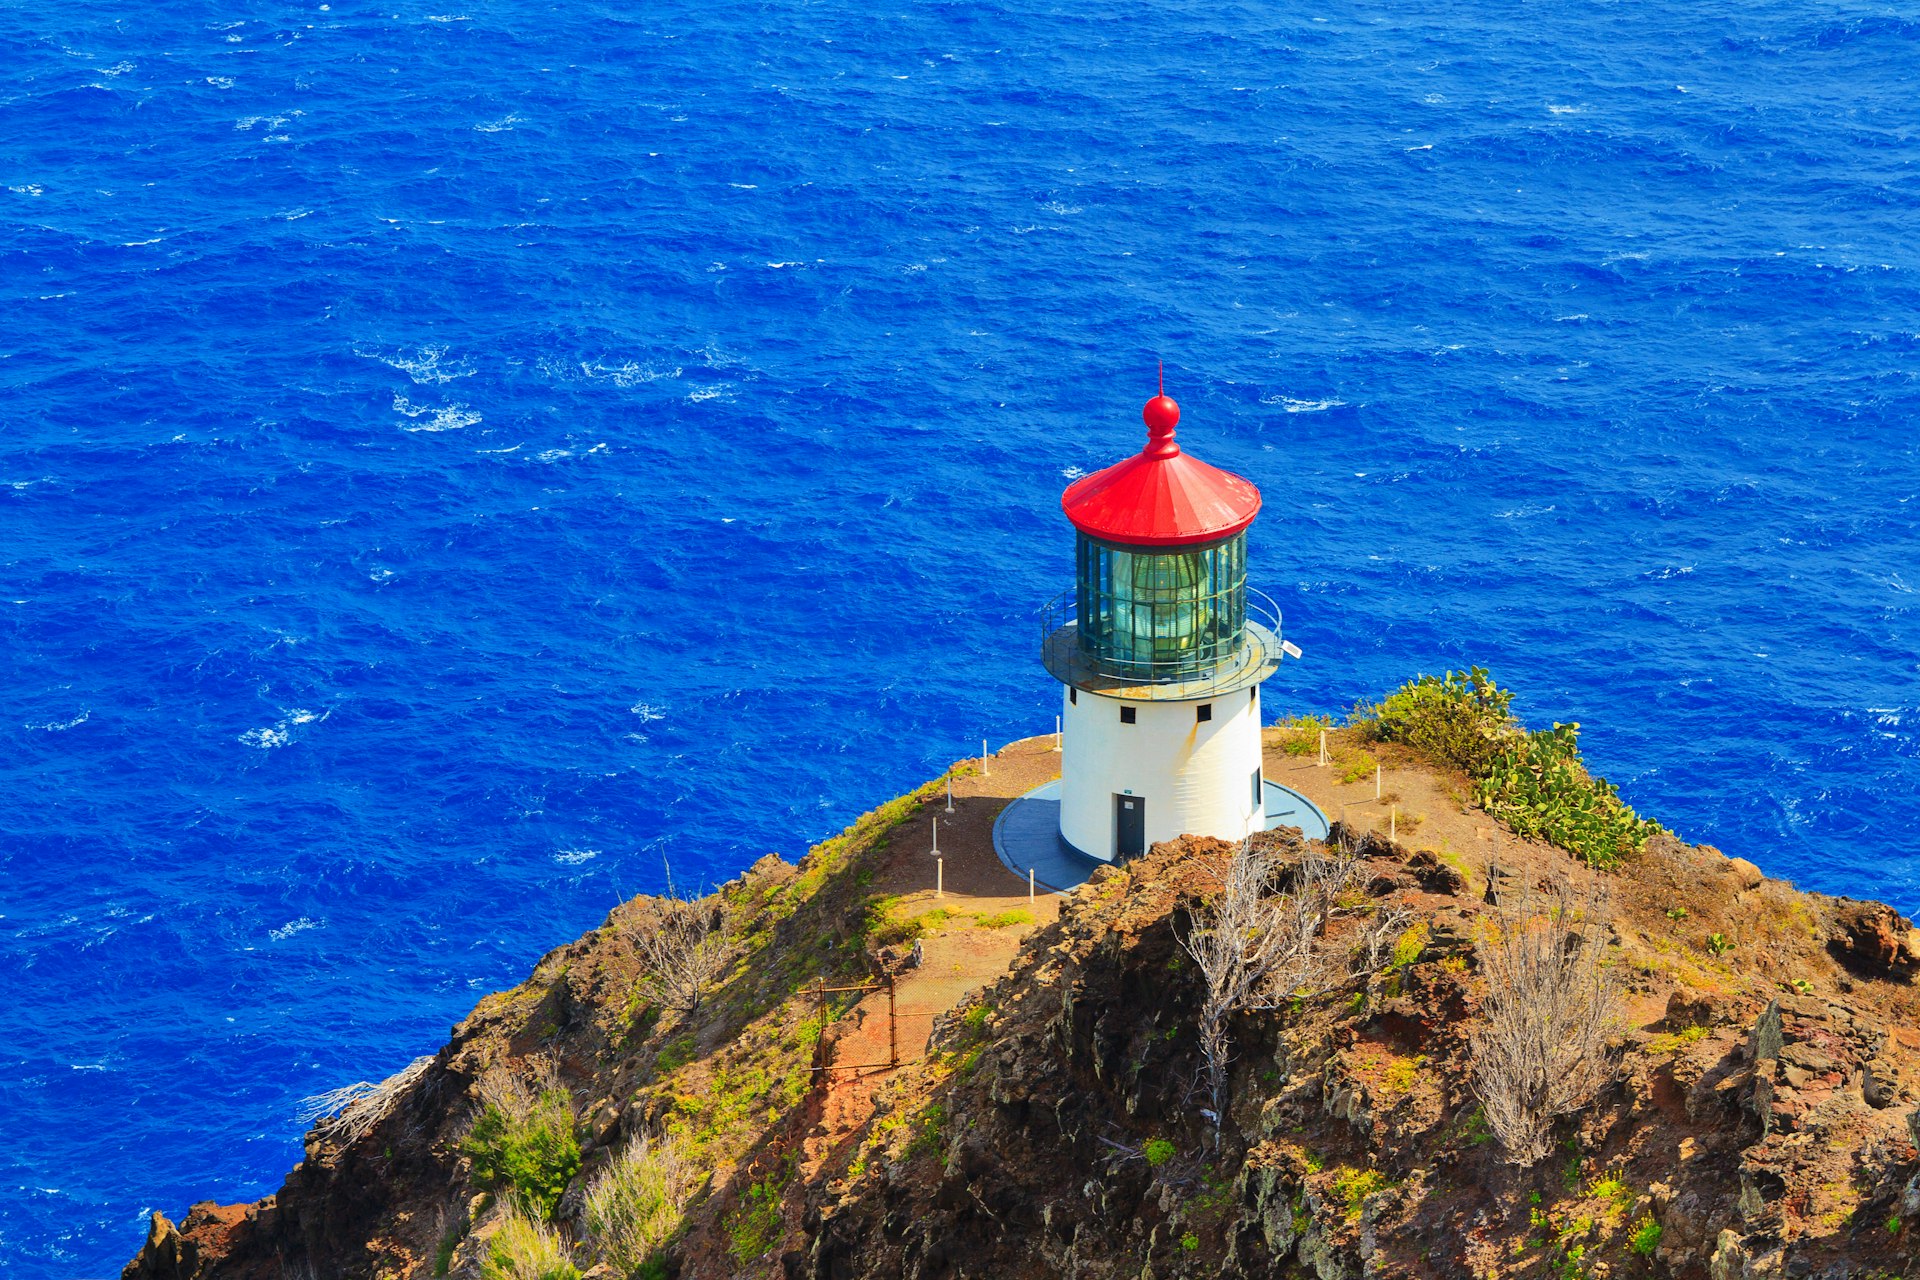 Makapu'u Point Lighthouse on edge of Pacific Ocean, viewed from above from Makapu'u Point summit overlook. The lighthouse is run by the US Coast Guard.